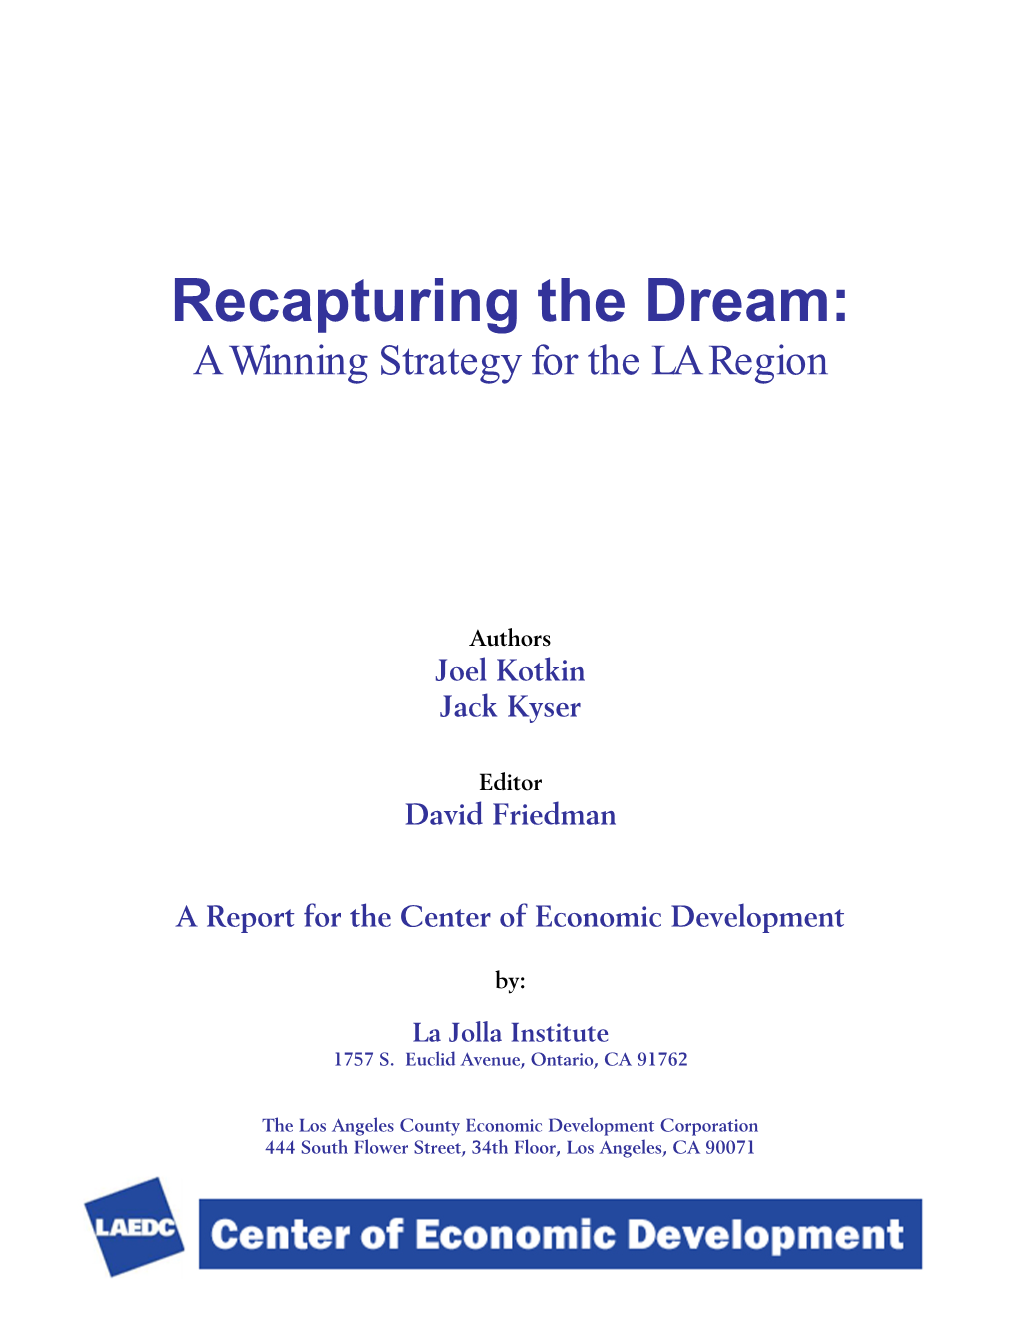 Recapturing the Dream: a Winning Strategy for the LA Region